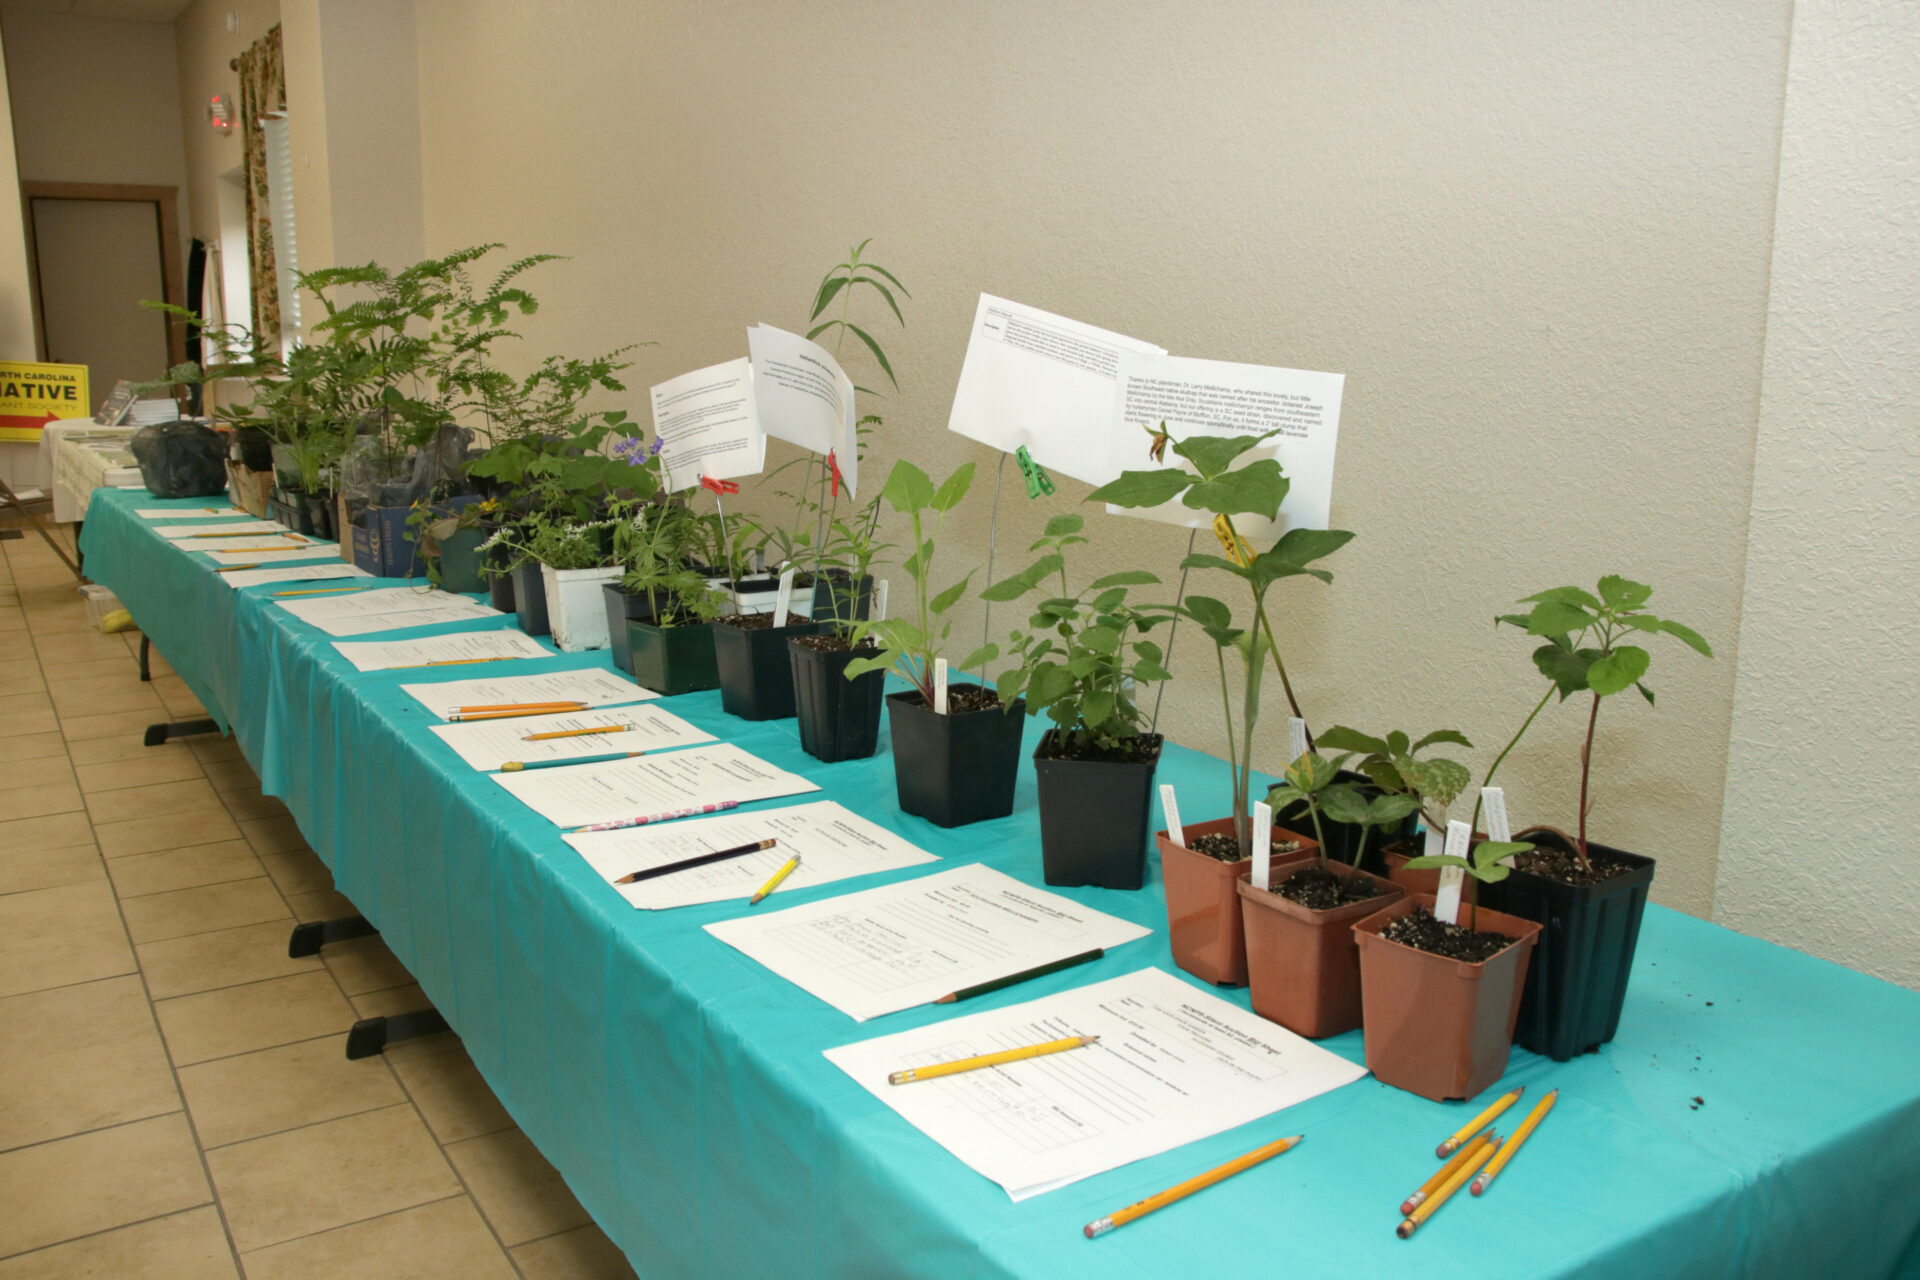 Plants lined up on the silent auction table